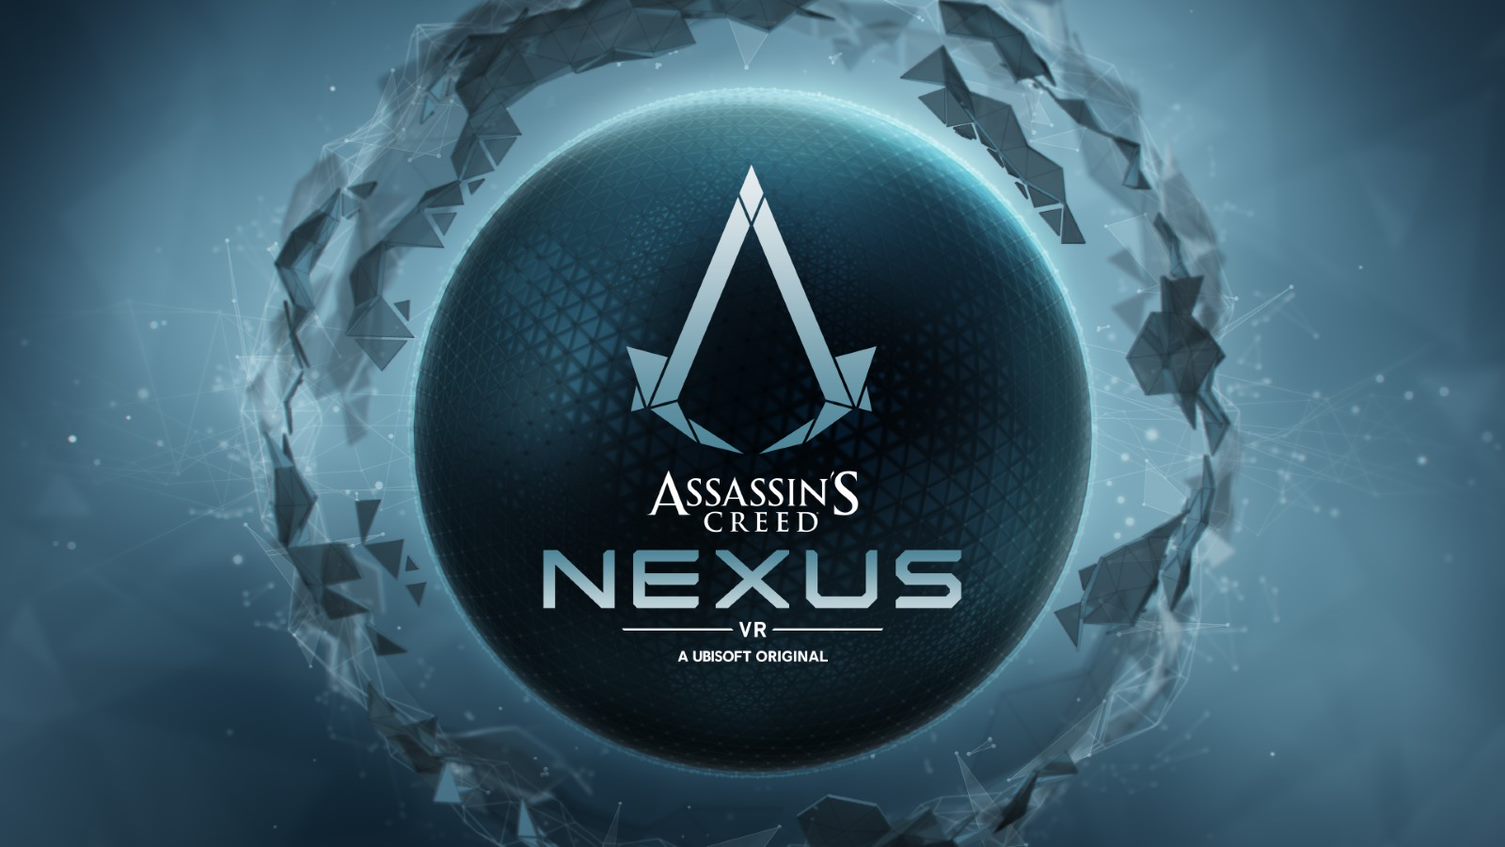 The Assassin's Creed logo appears in white on a blue circle, followed by the words Assassin’s Creed: Nexus VR